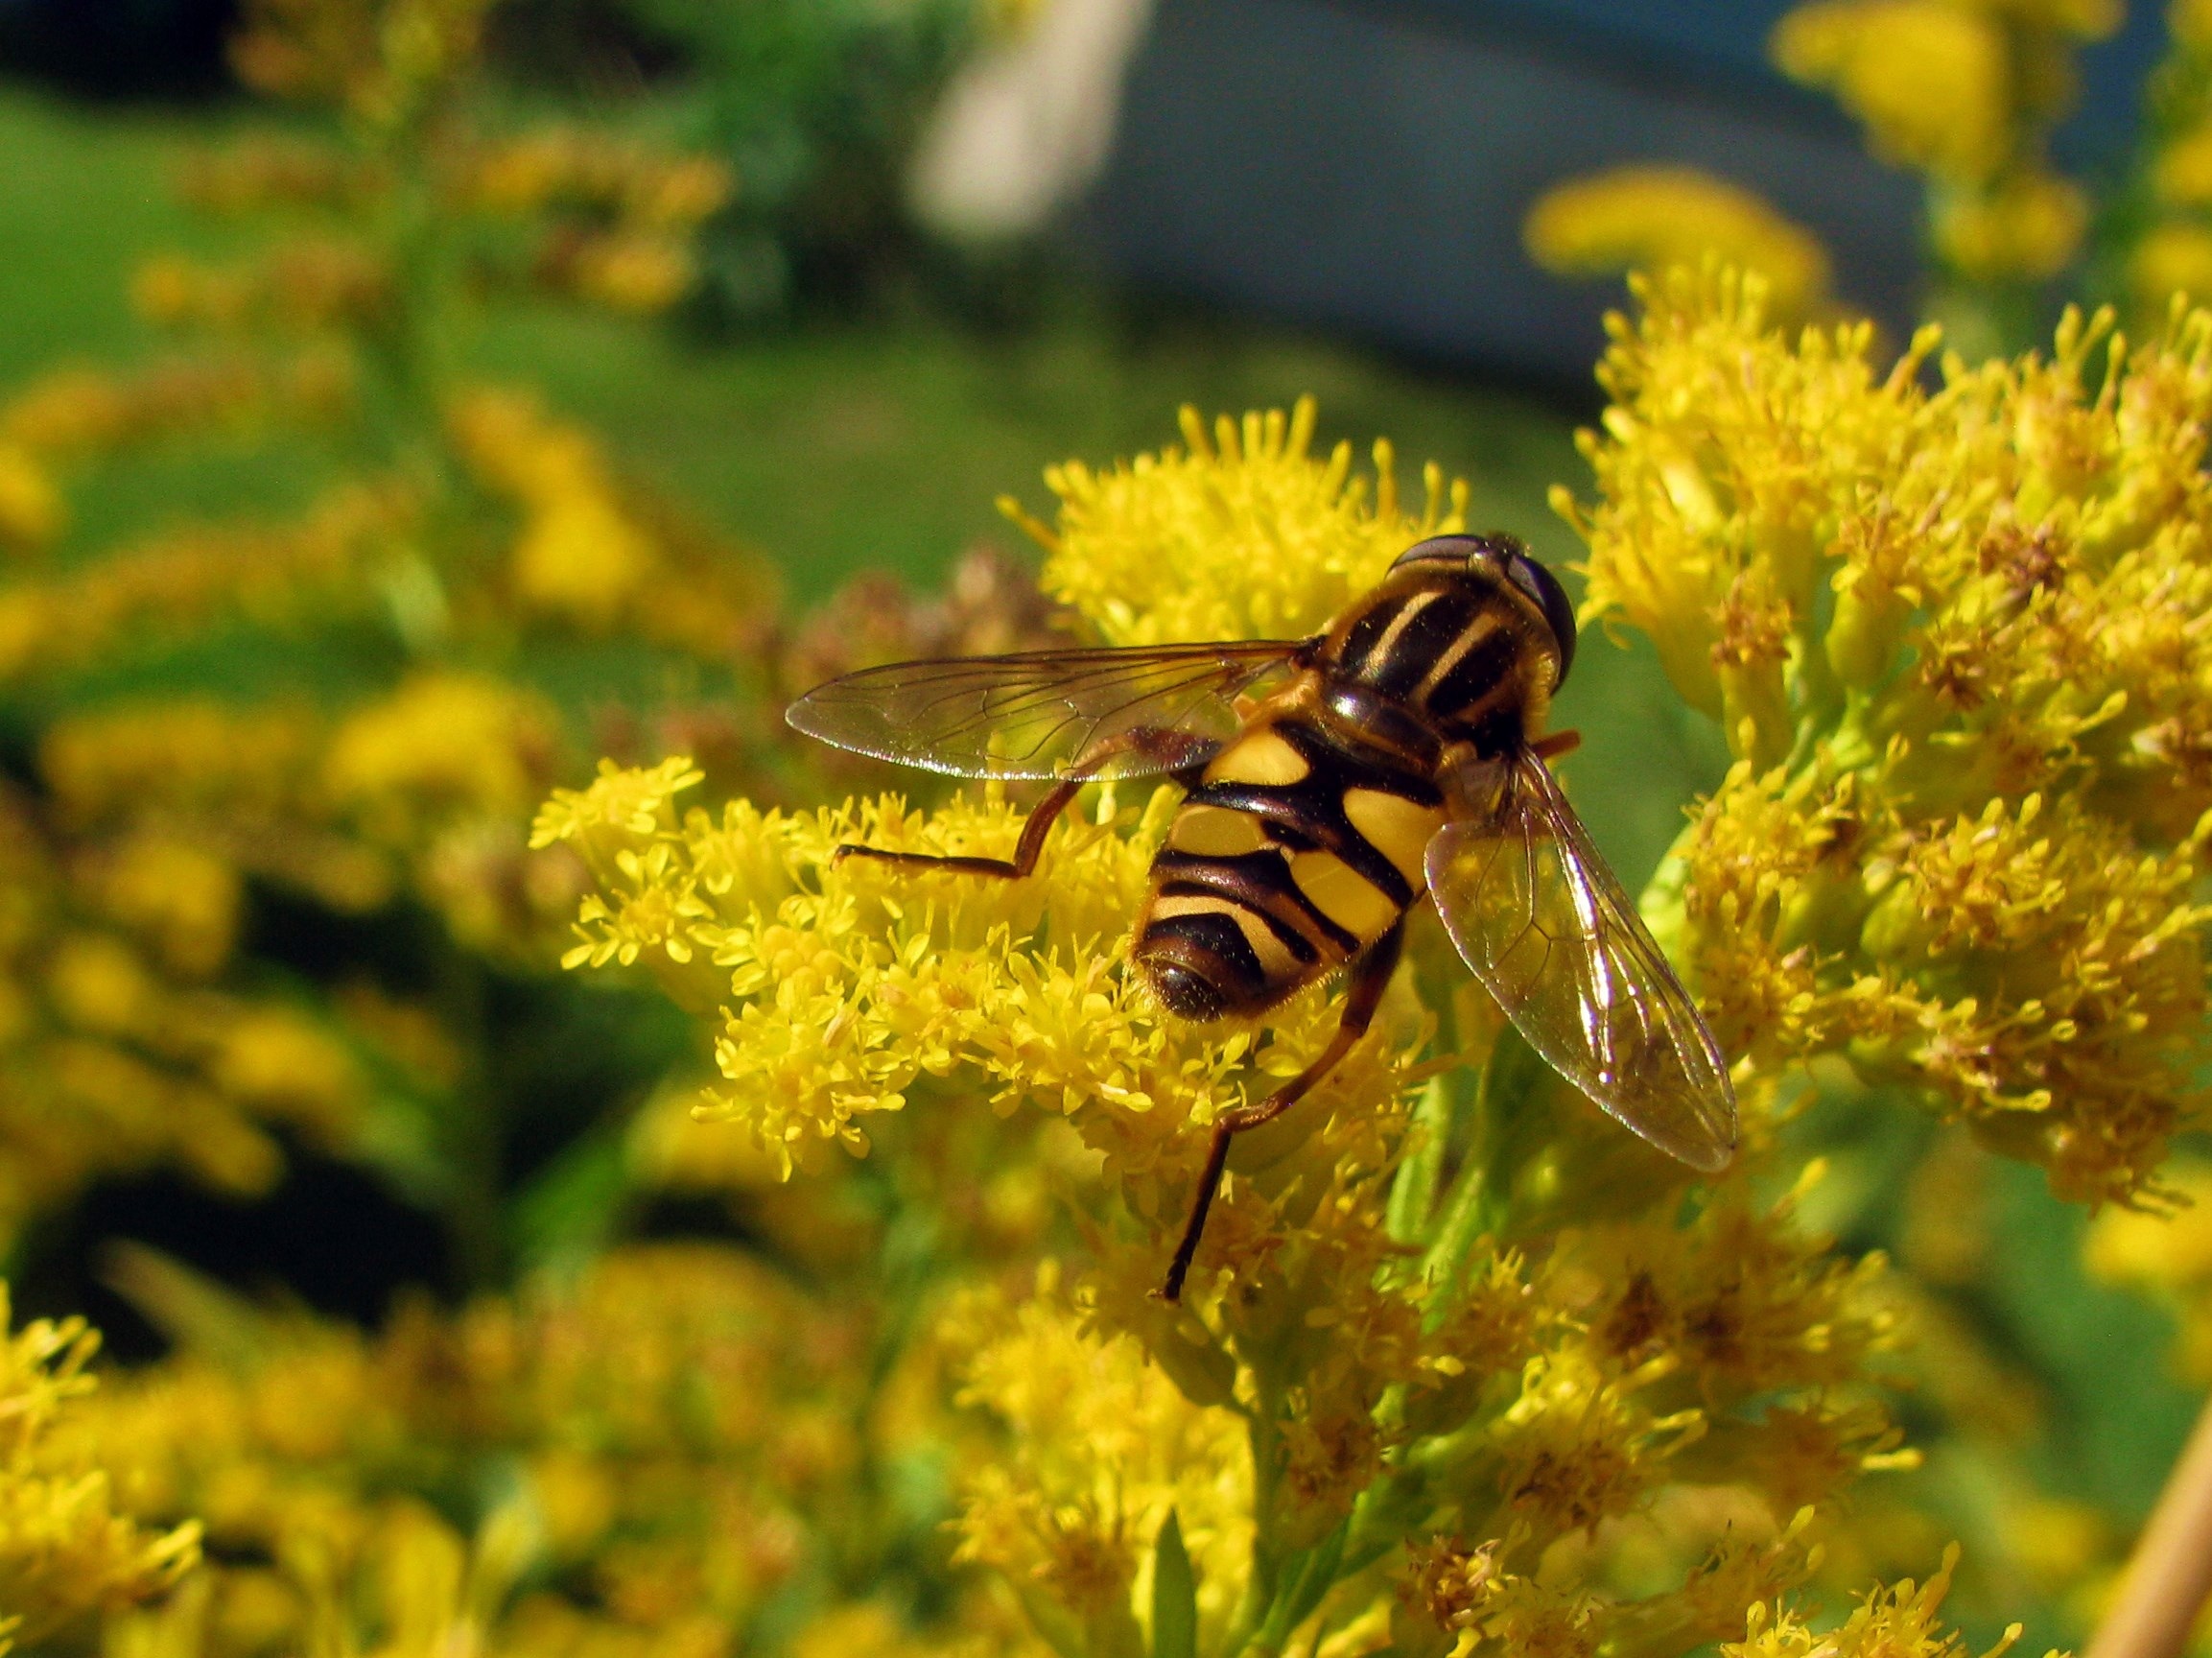 yellow and black honeybee perched on yellow flower